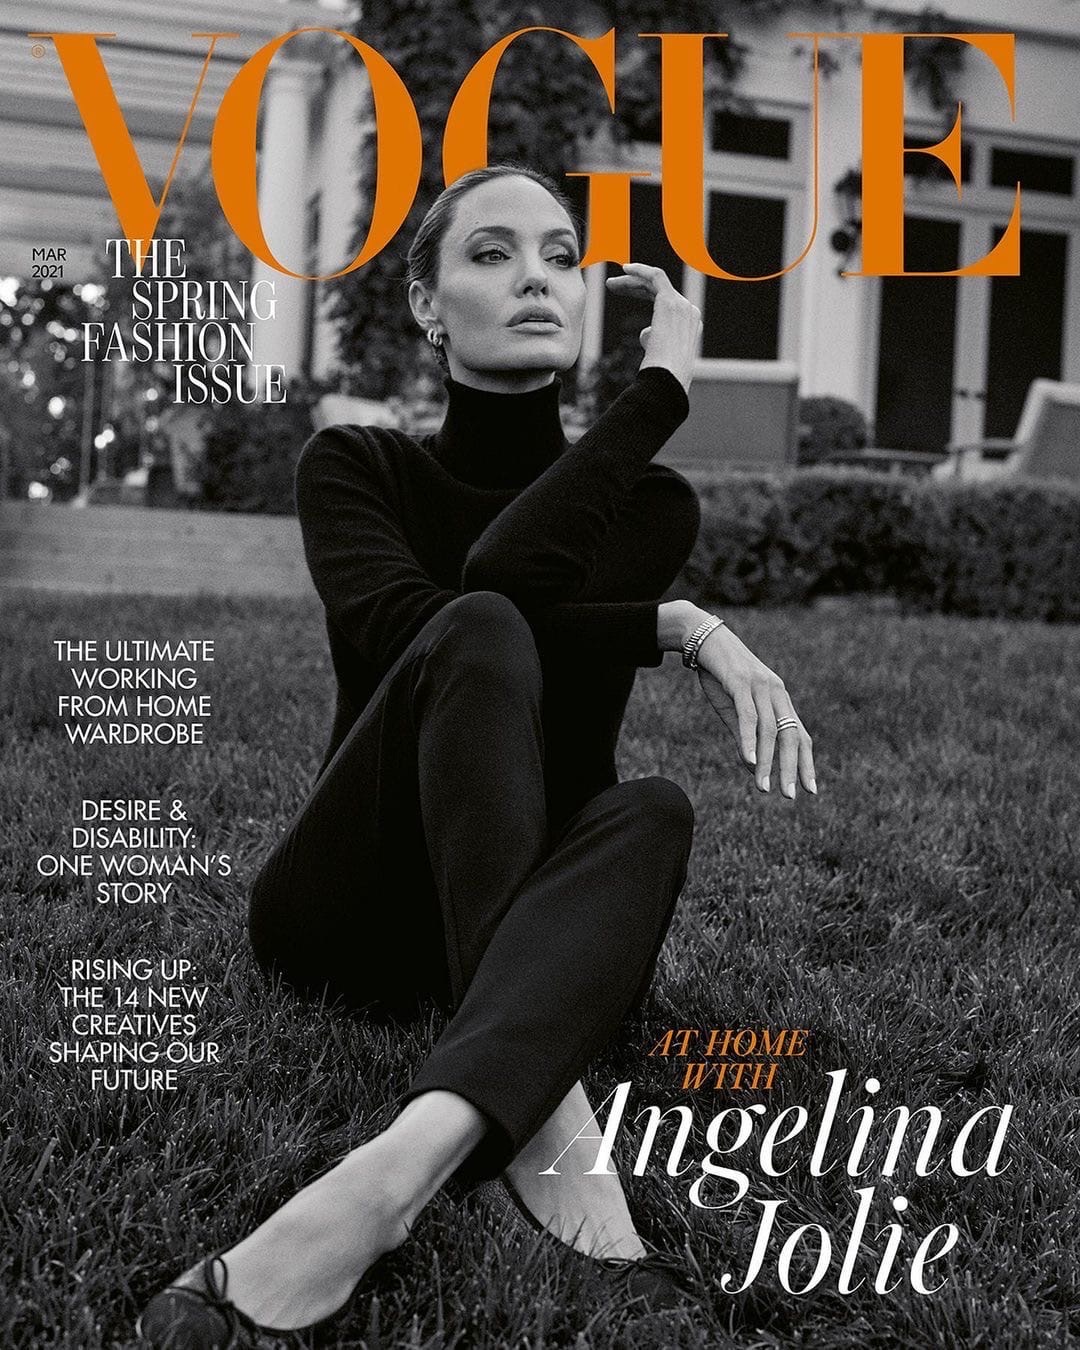 Angelina Jolie for Vogue 2021 - Angelina Jolie, Actors and actresses, PHOTOSESSION, Vogue, The photo, Celebrities, 2021, Longpost